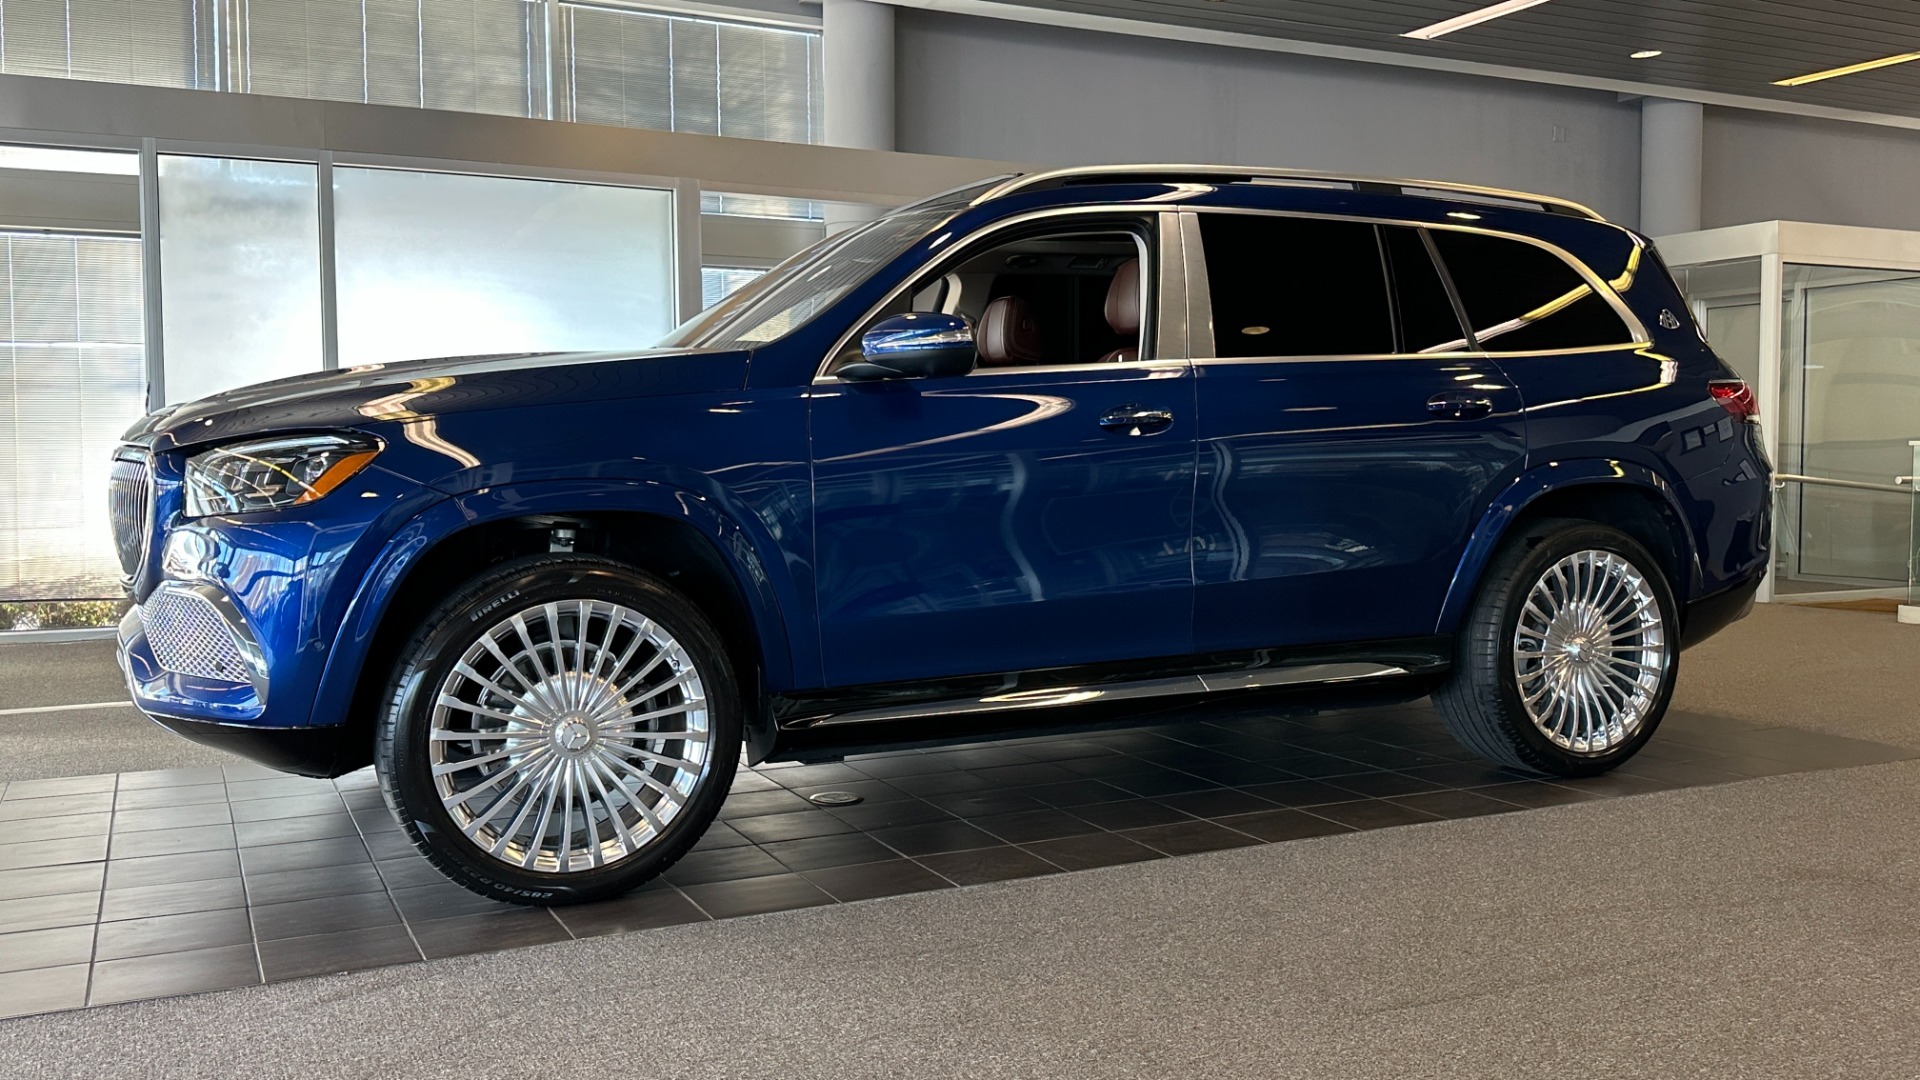 Used 2021 Mercedes-Benz GLS MAYBACH GLS600 / 23IN WHEELS / PIANO BLACK TRIM / CHAMPAGNE FRIDGE for sale $216,995 at Formula Imports in Charlotte NC 28227 3